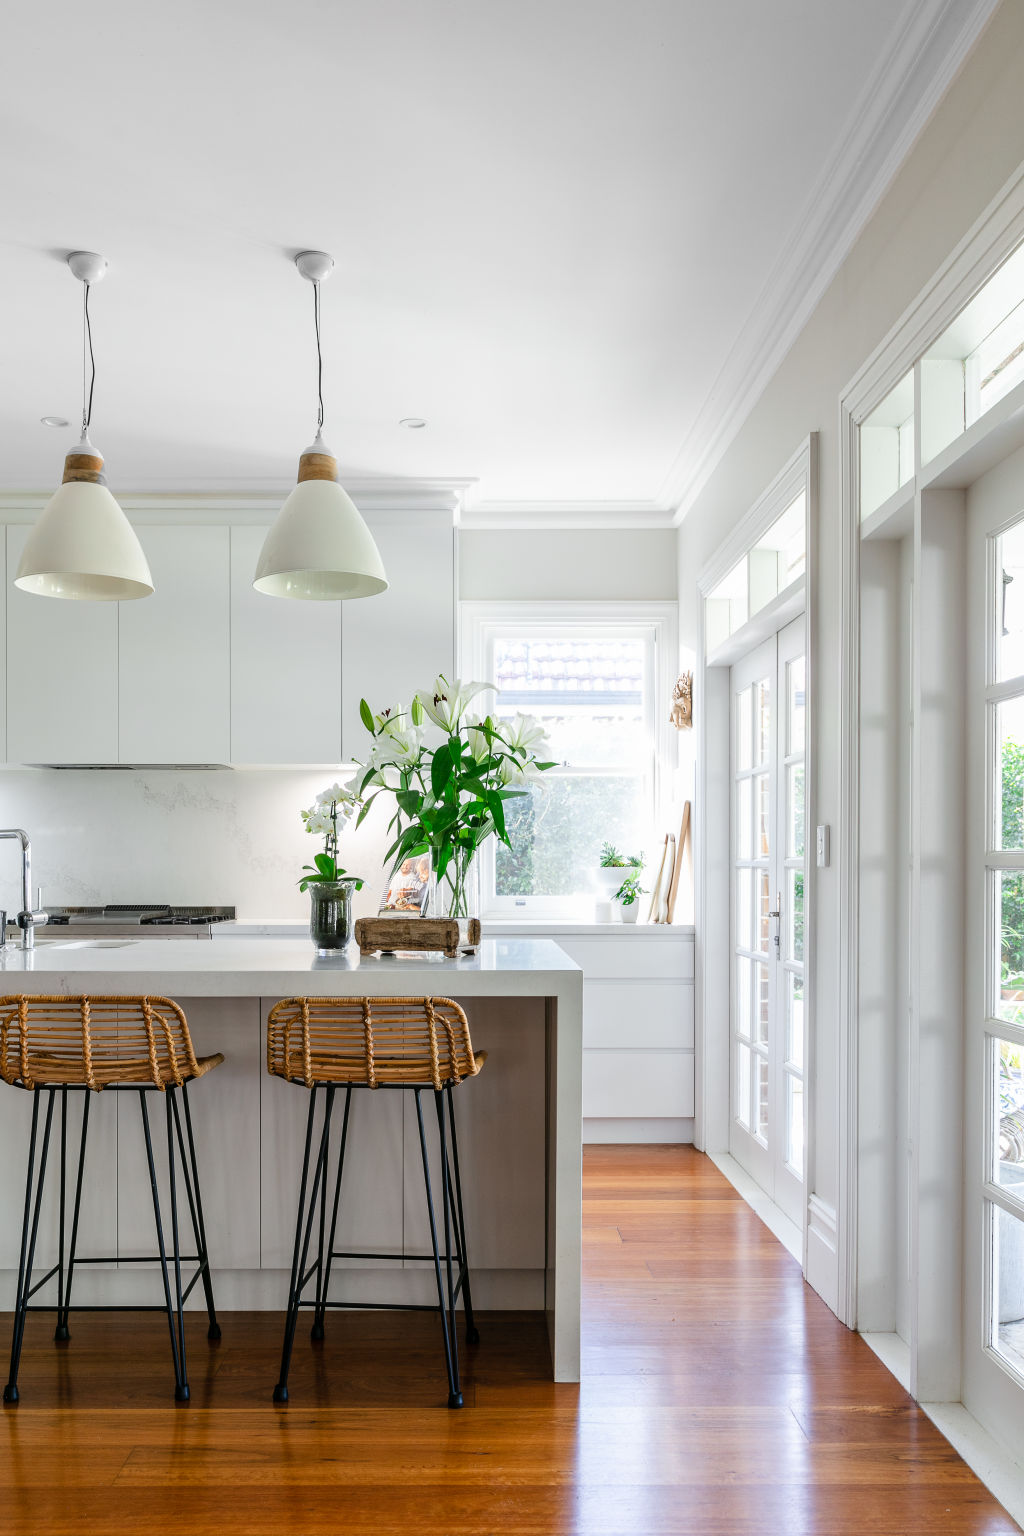 The restoration included this modern kitchen with a walk-in pantry. Photo: Moss + Co Photography